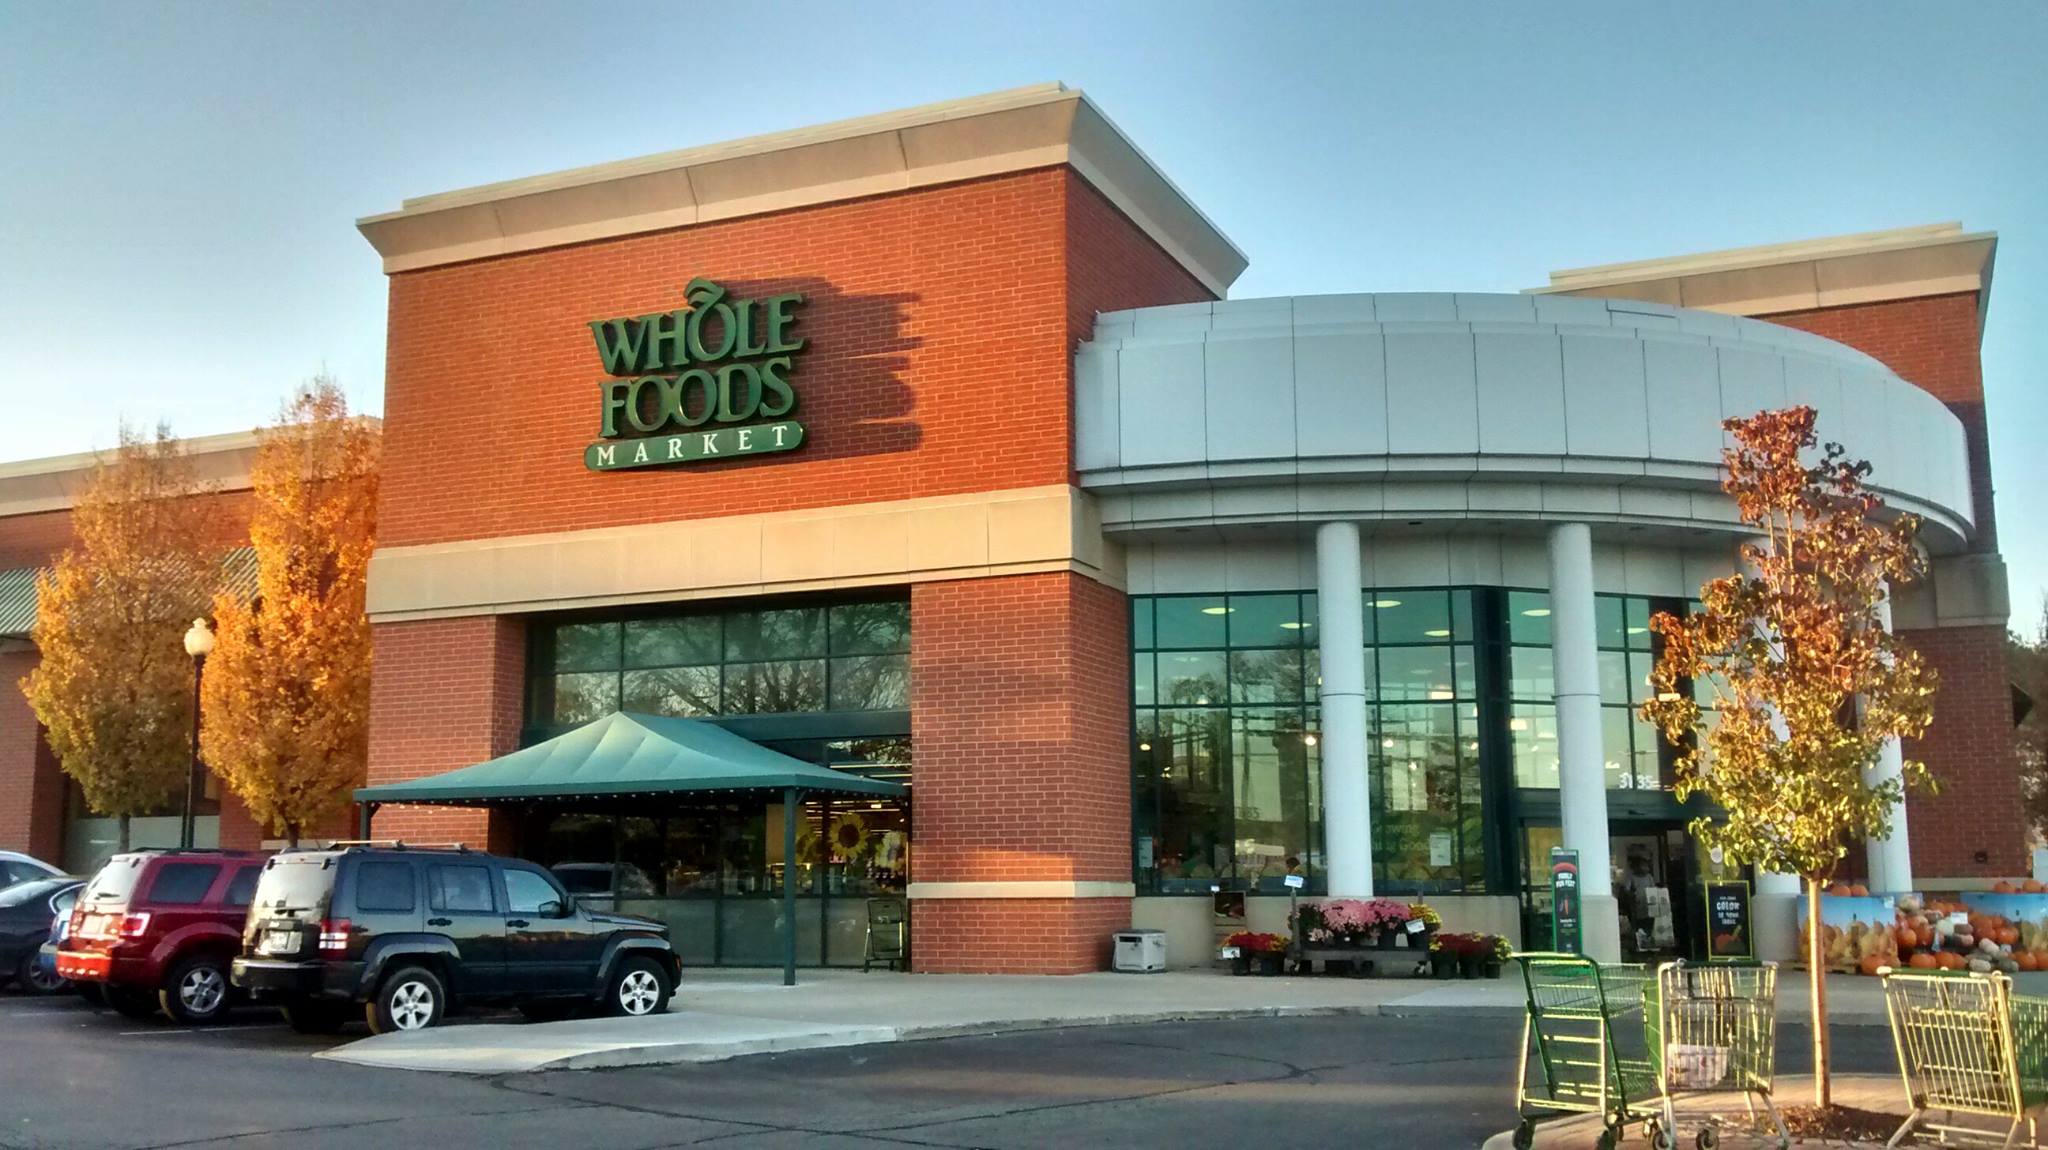 External view of a Whole Foods Market in Ann Arbor, Michigan.